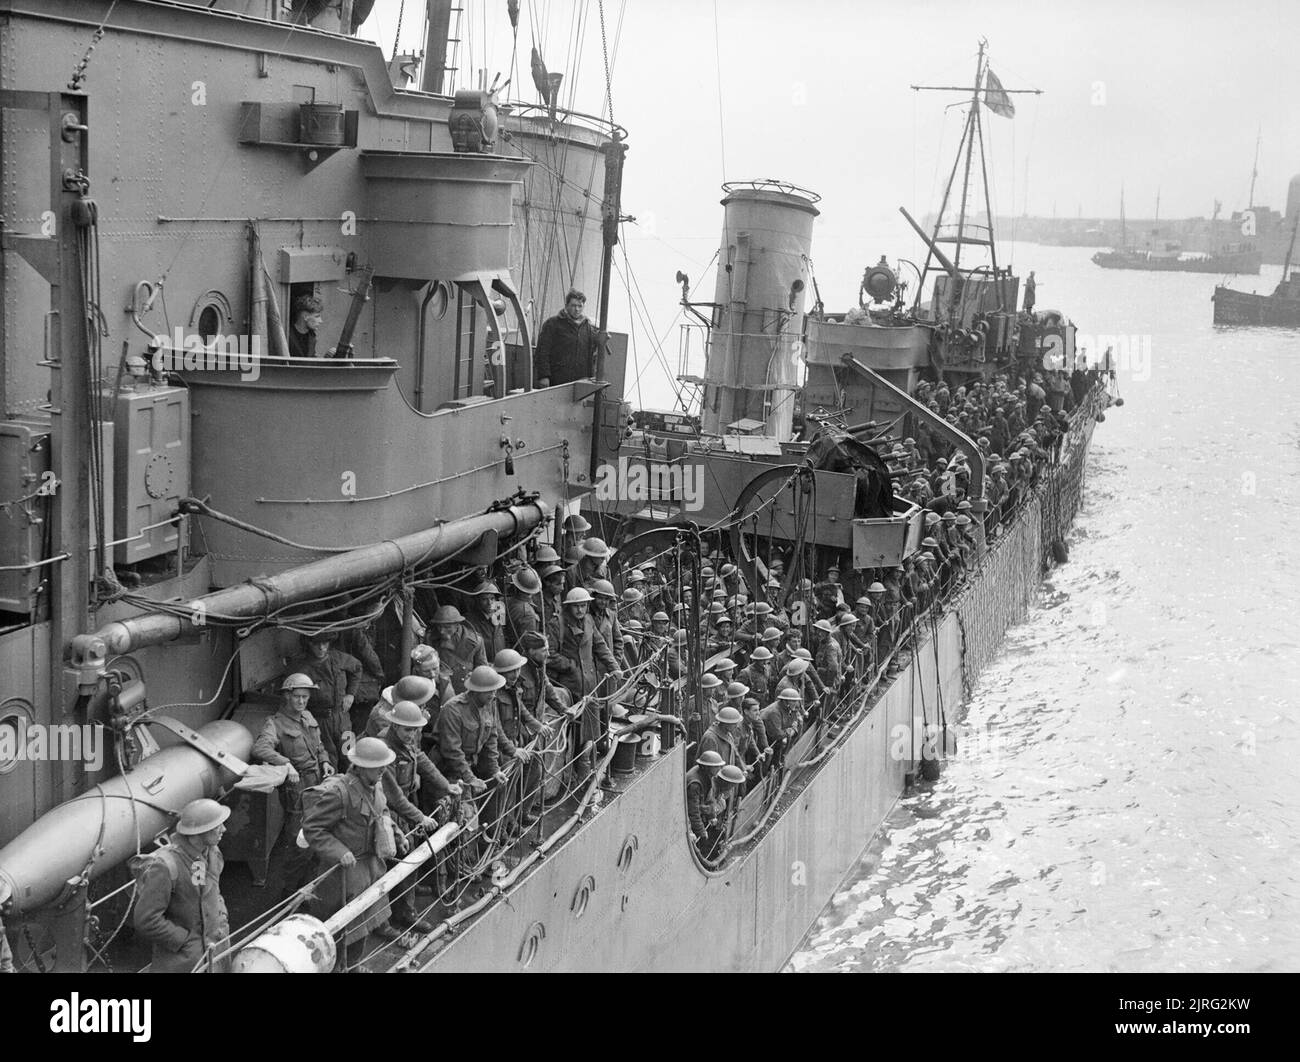 Troops evacuated from Dunkirk on a destroyer about to berth at Dover, 31 May 1940. Evacuated troops on a destroyer about to berth at Dover, 31 May 1940. Stock Photo